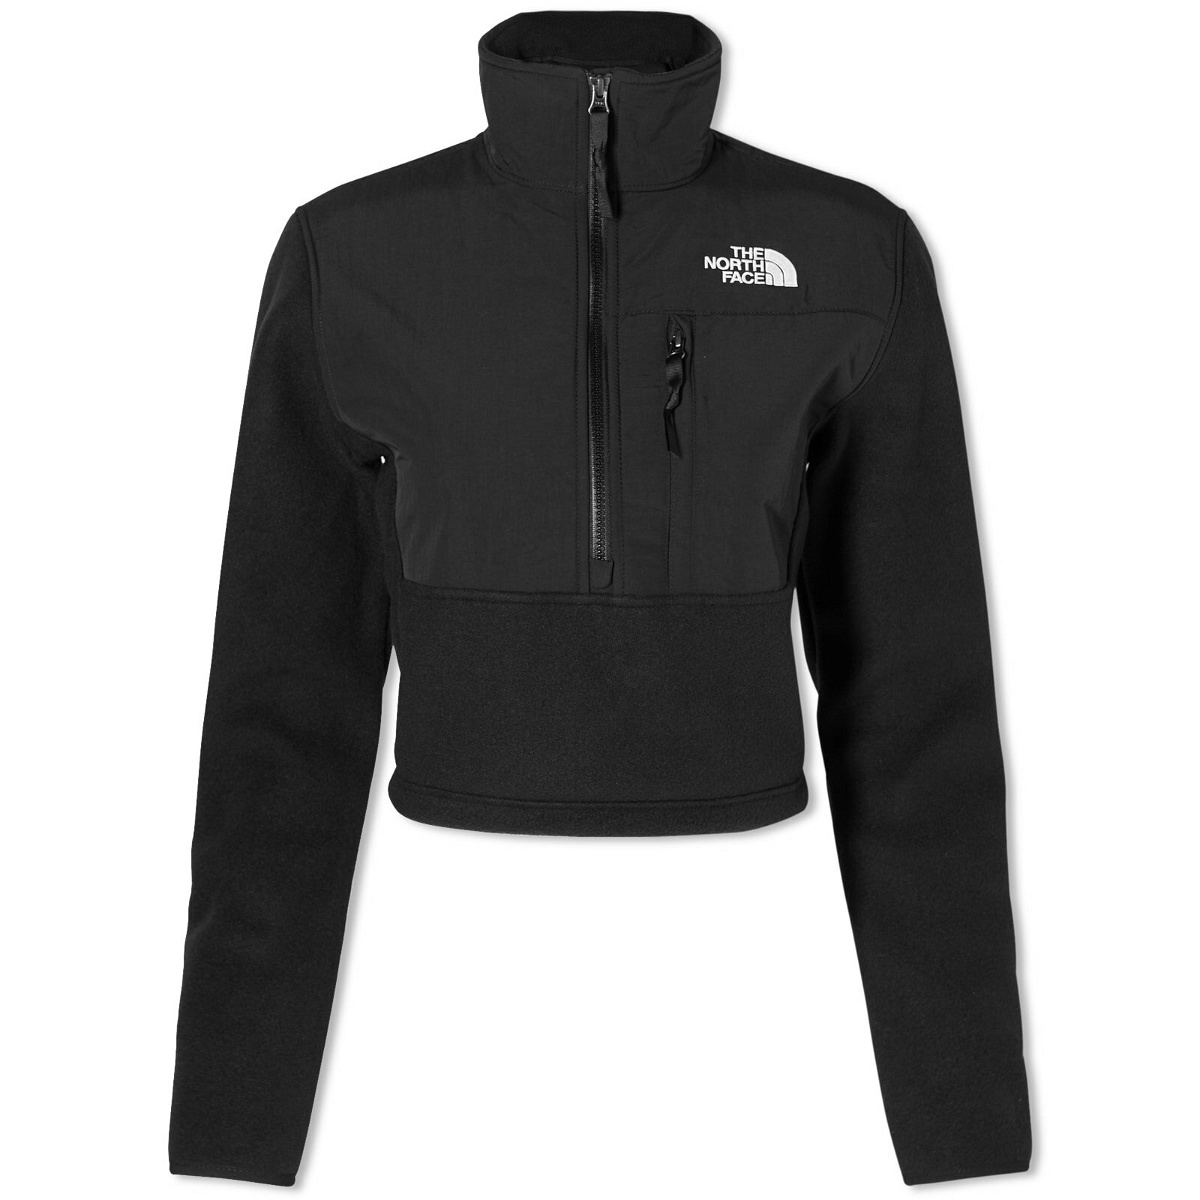 The North Face Women's Denali Fleece Cropped Jacket in Black The